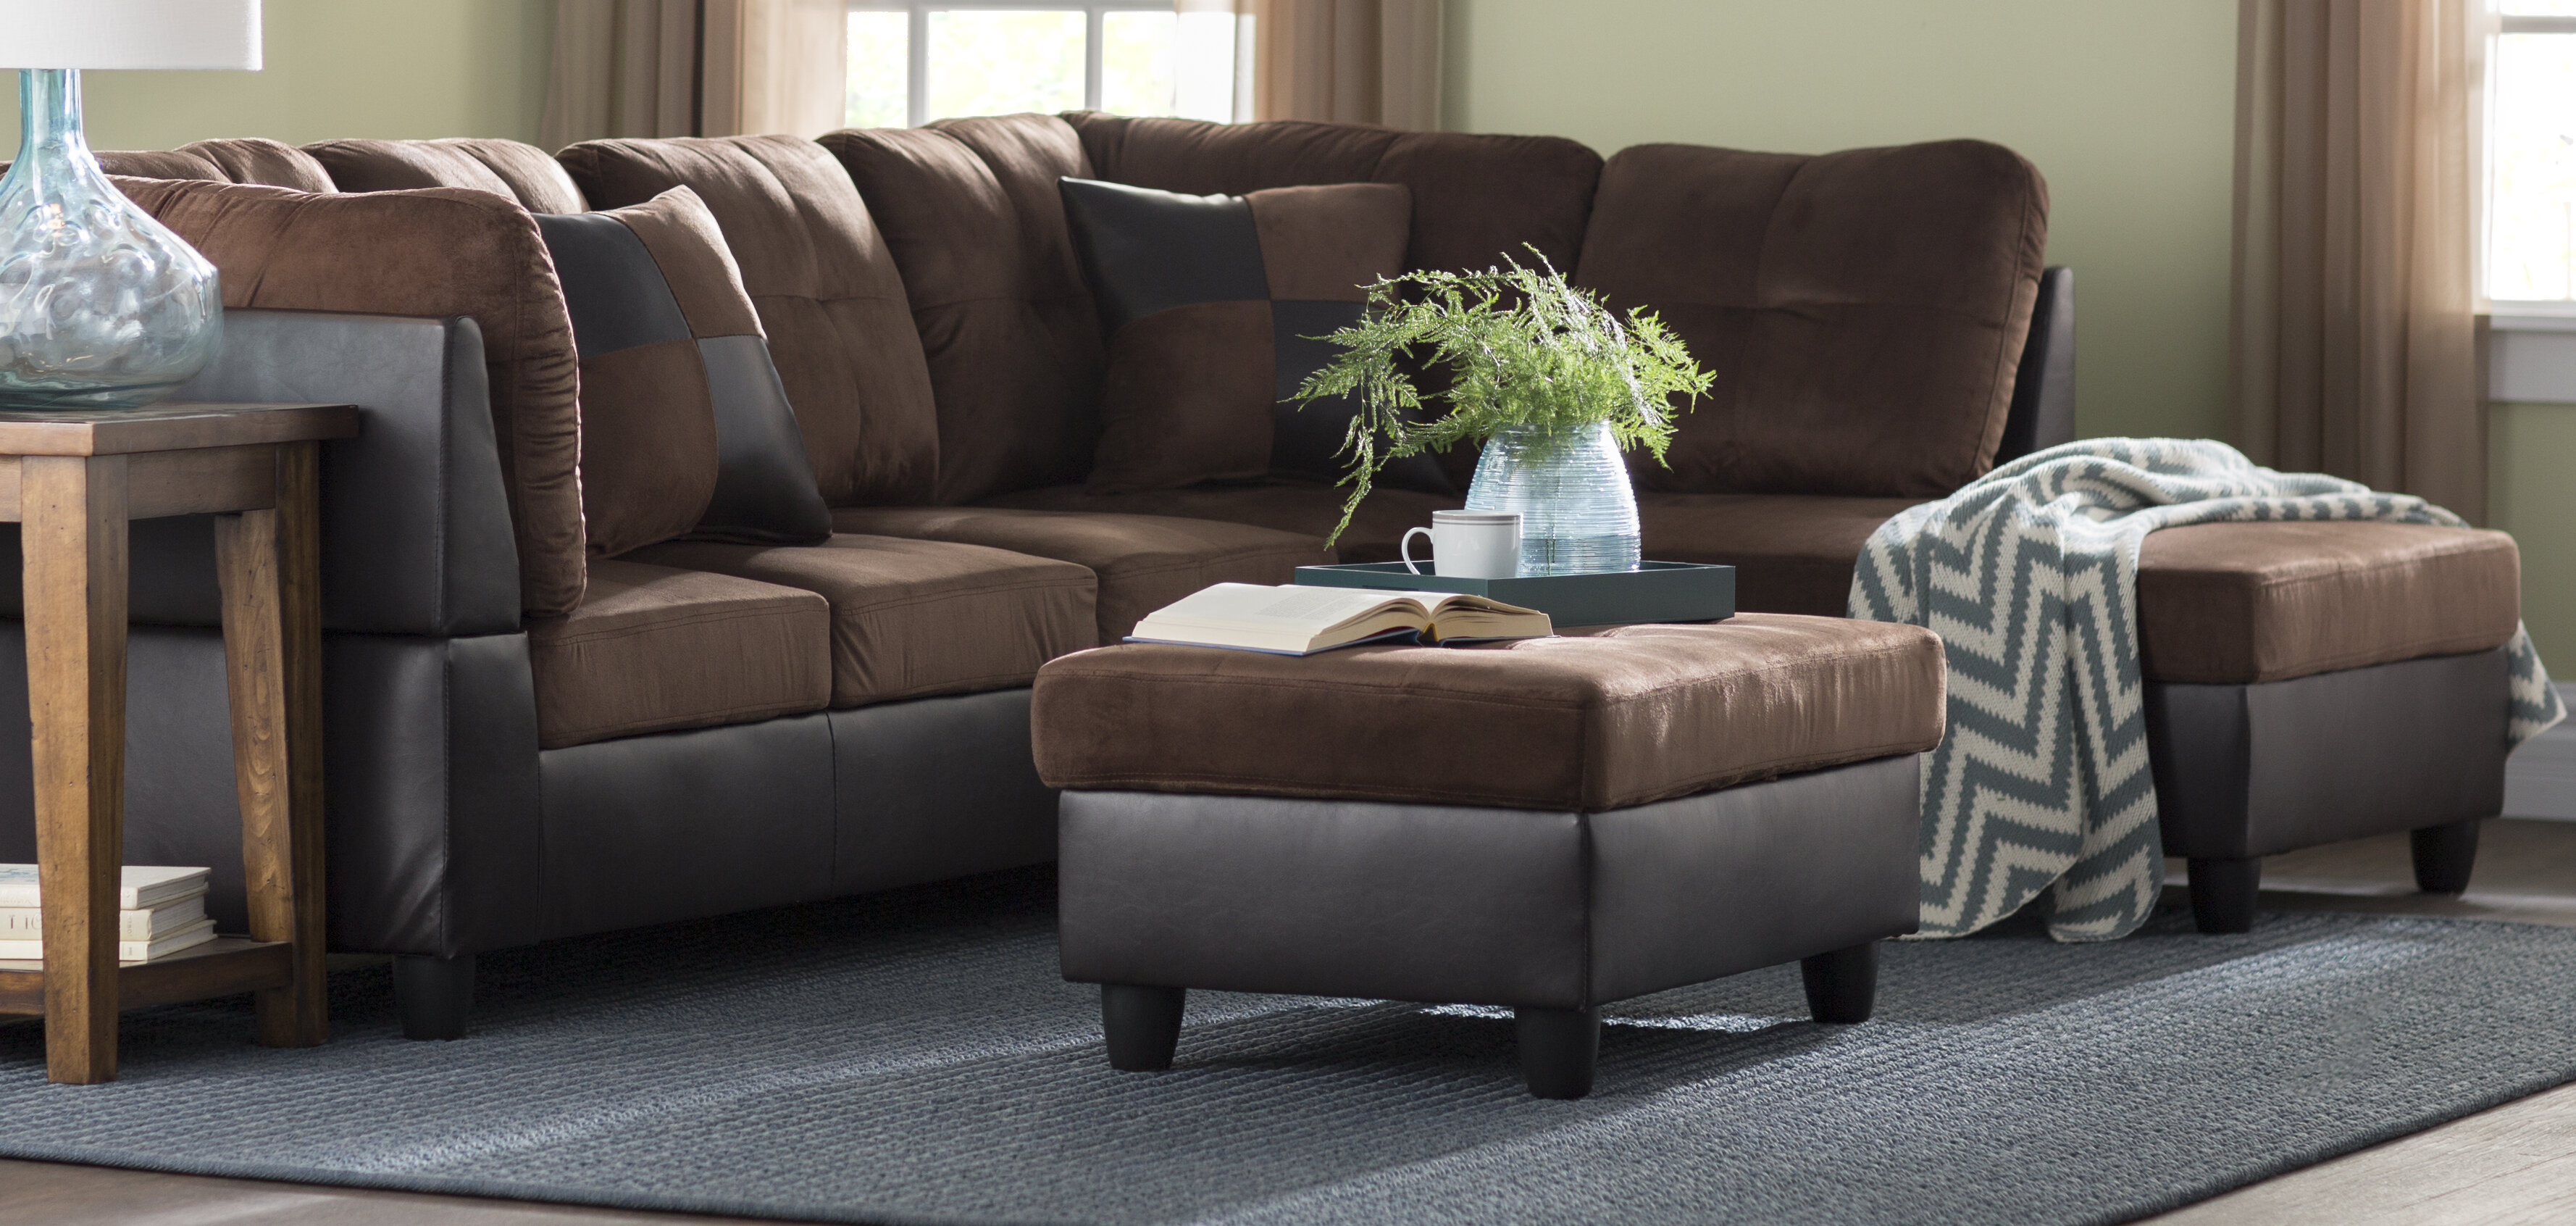 Our Best Sectional Deals 